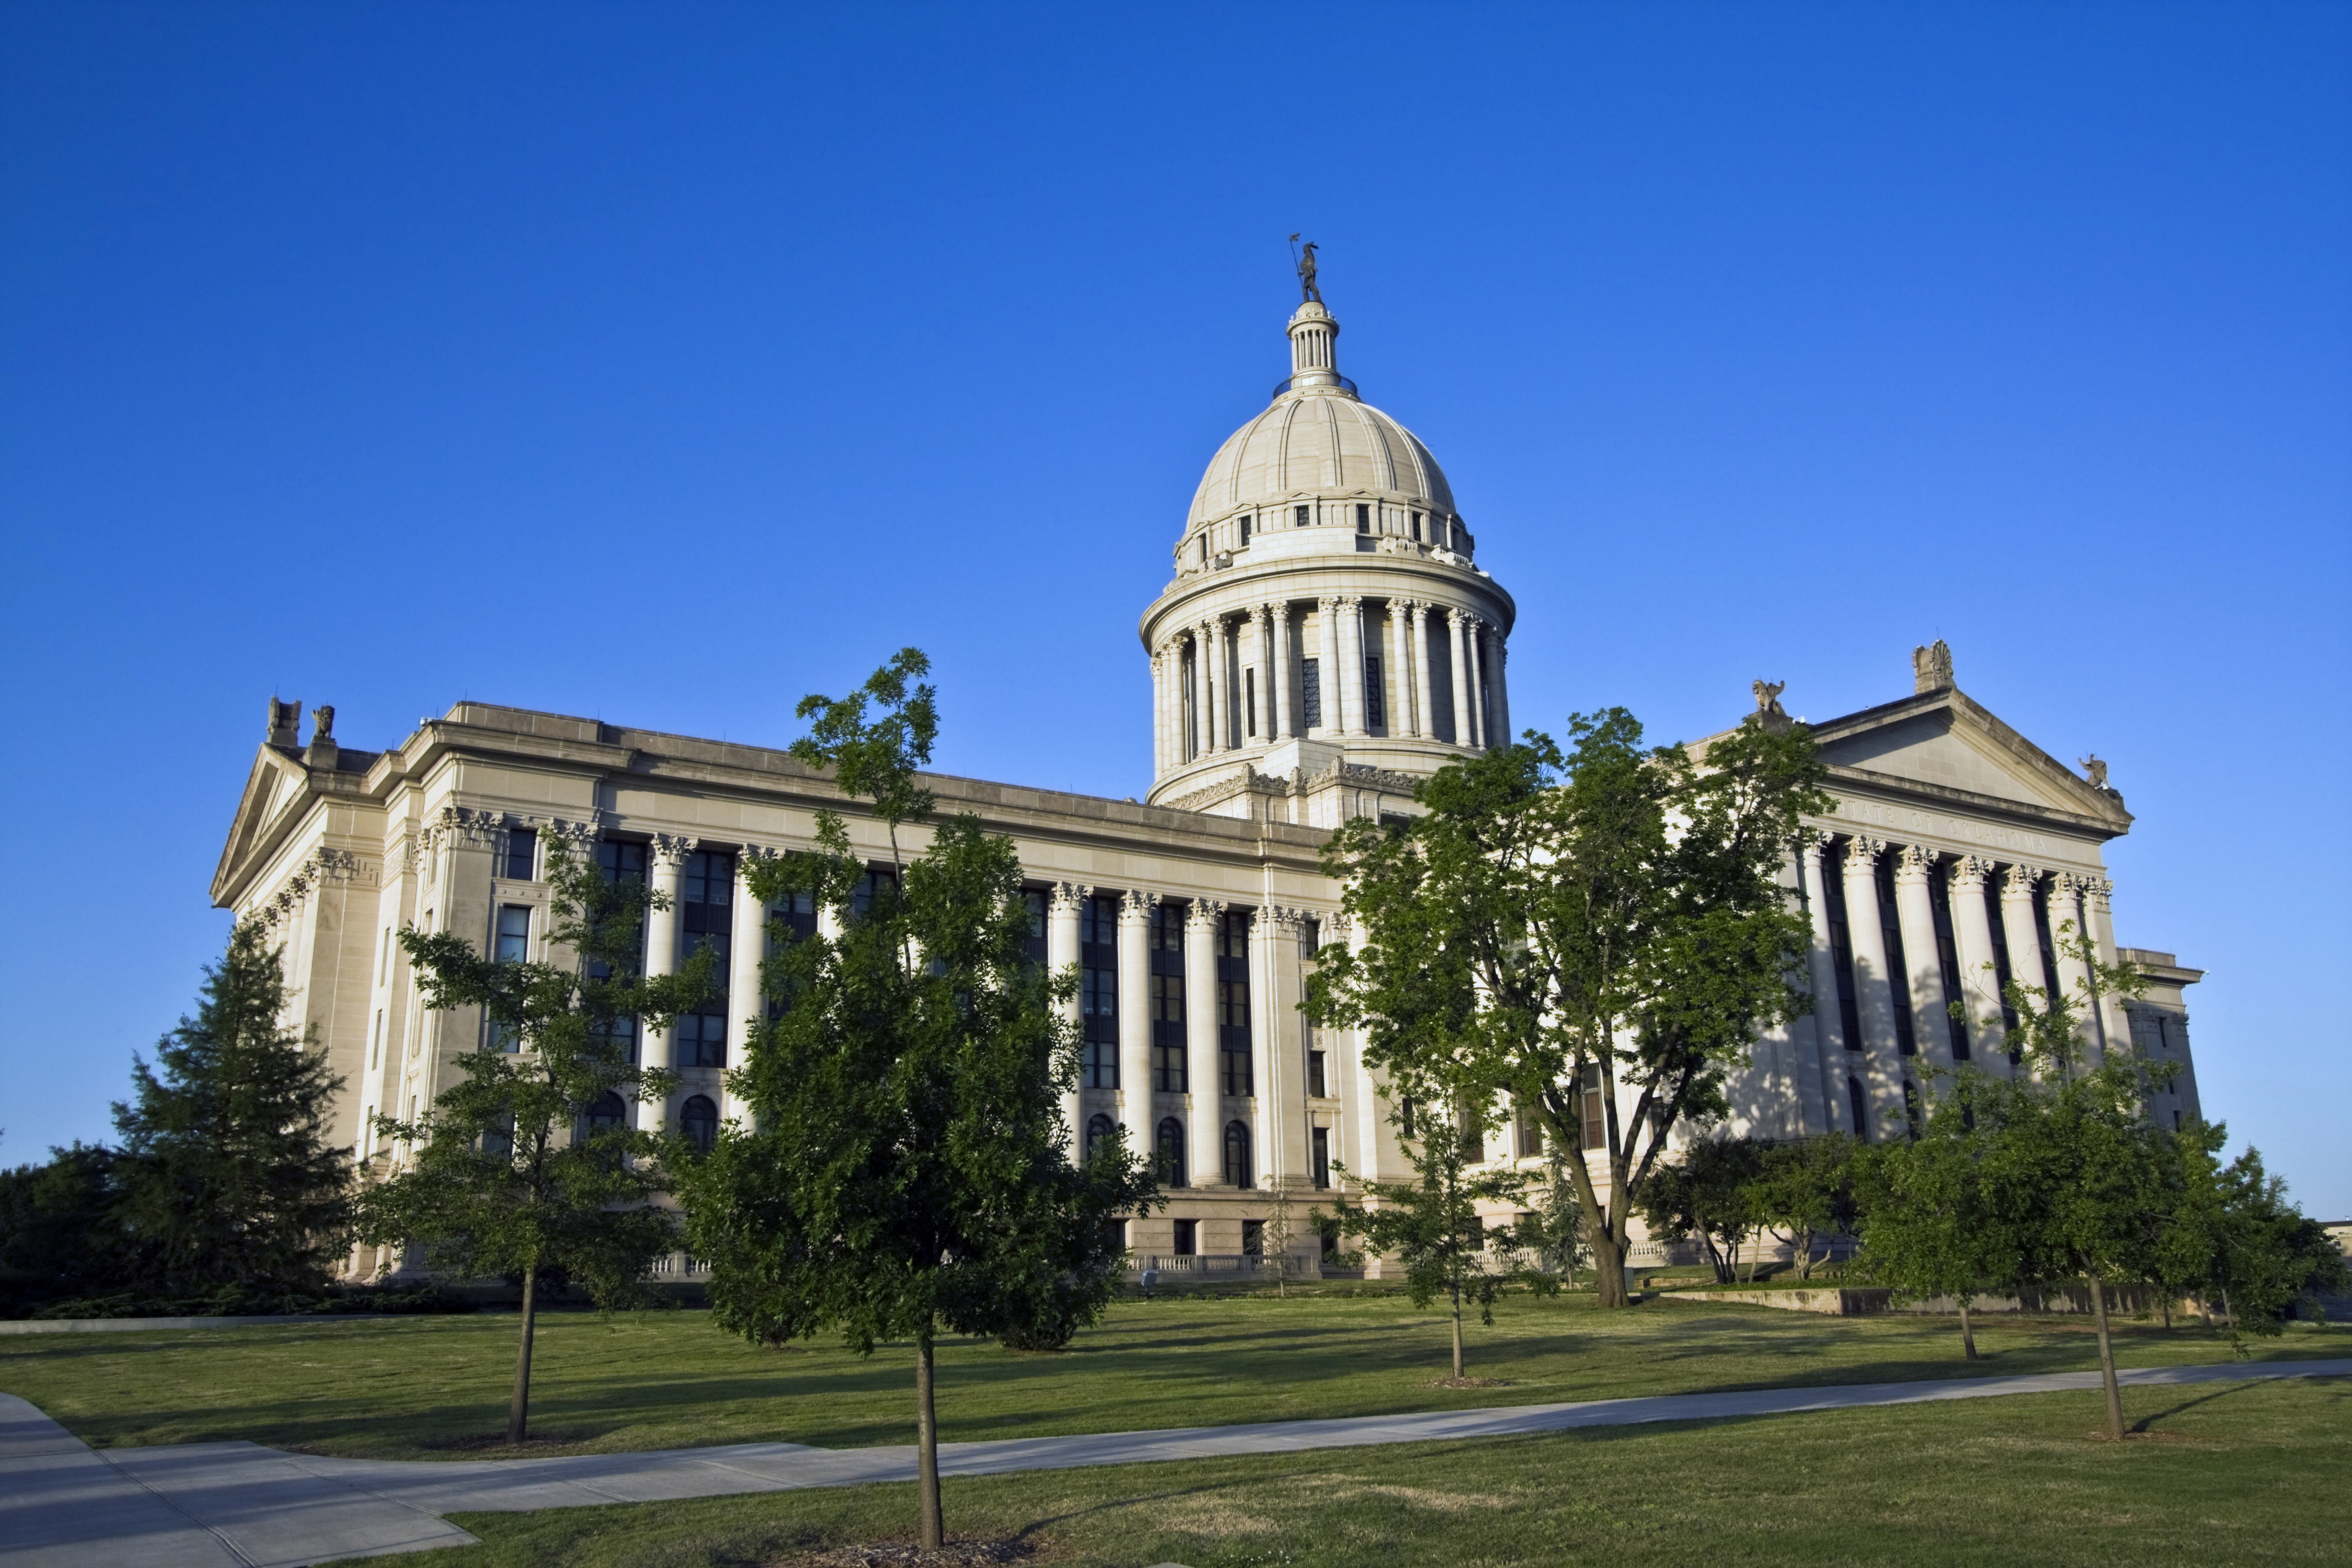 Oklahoma's State Capitol building